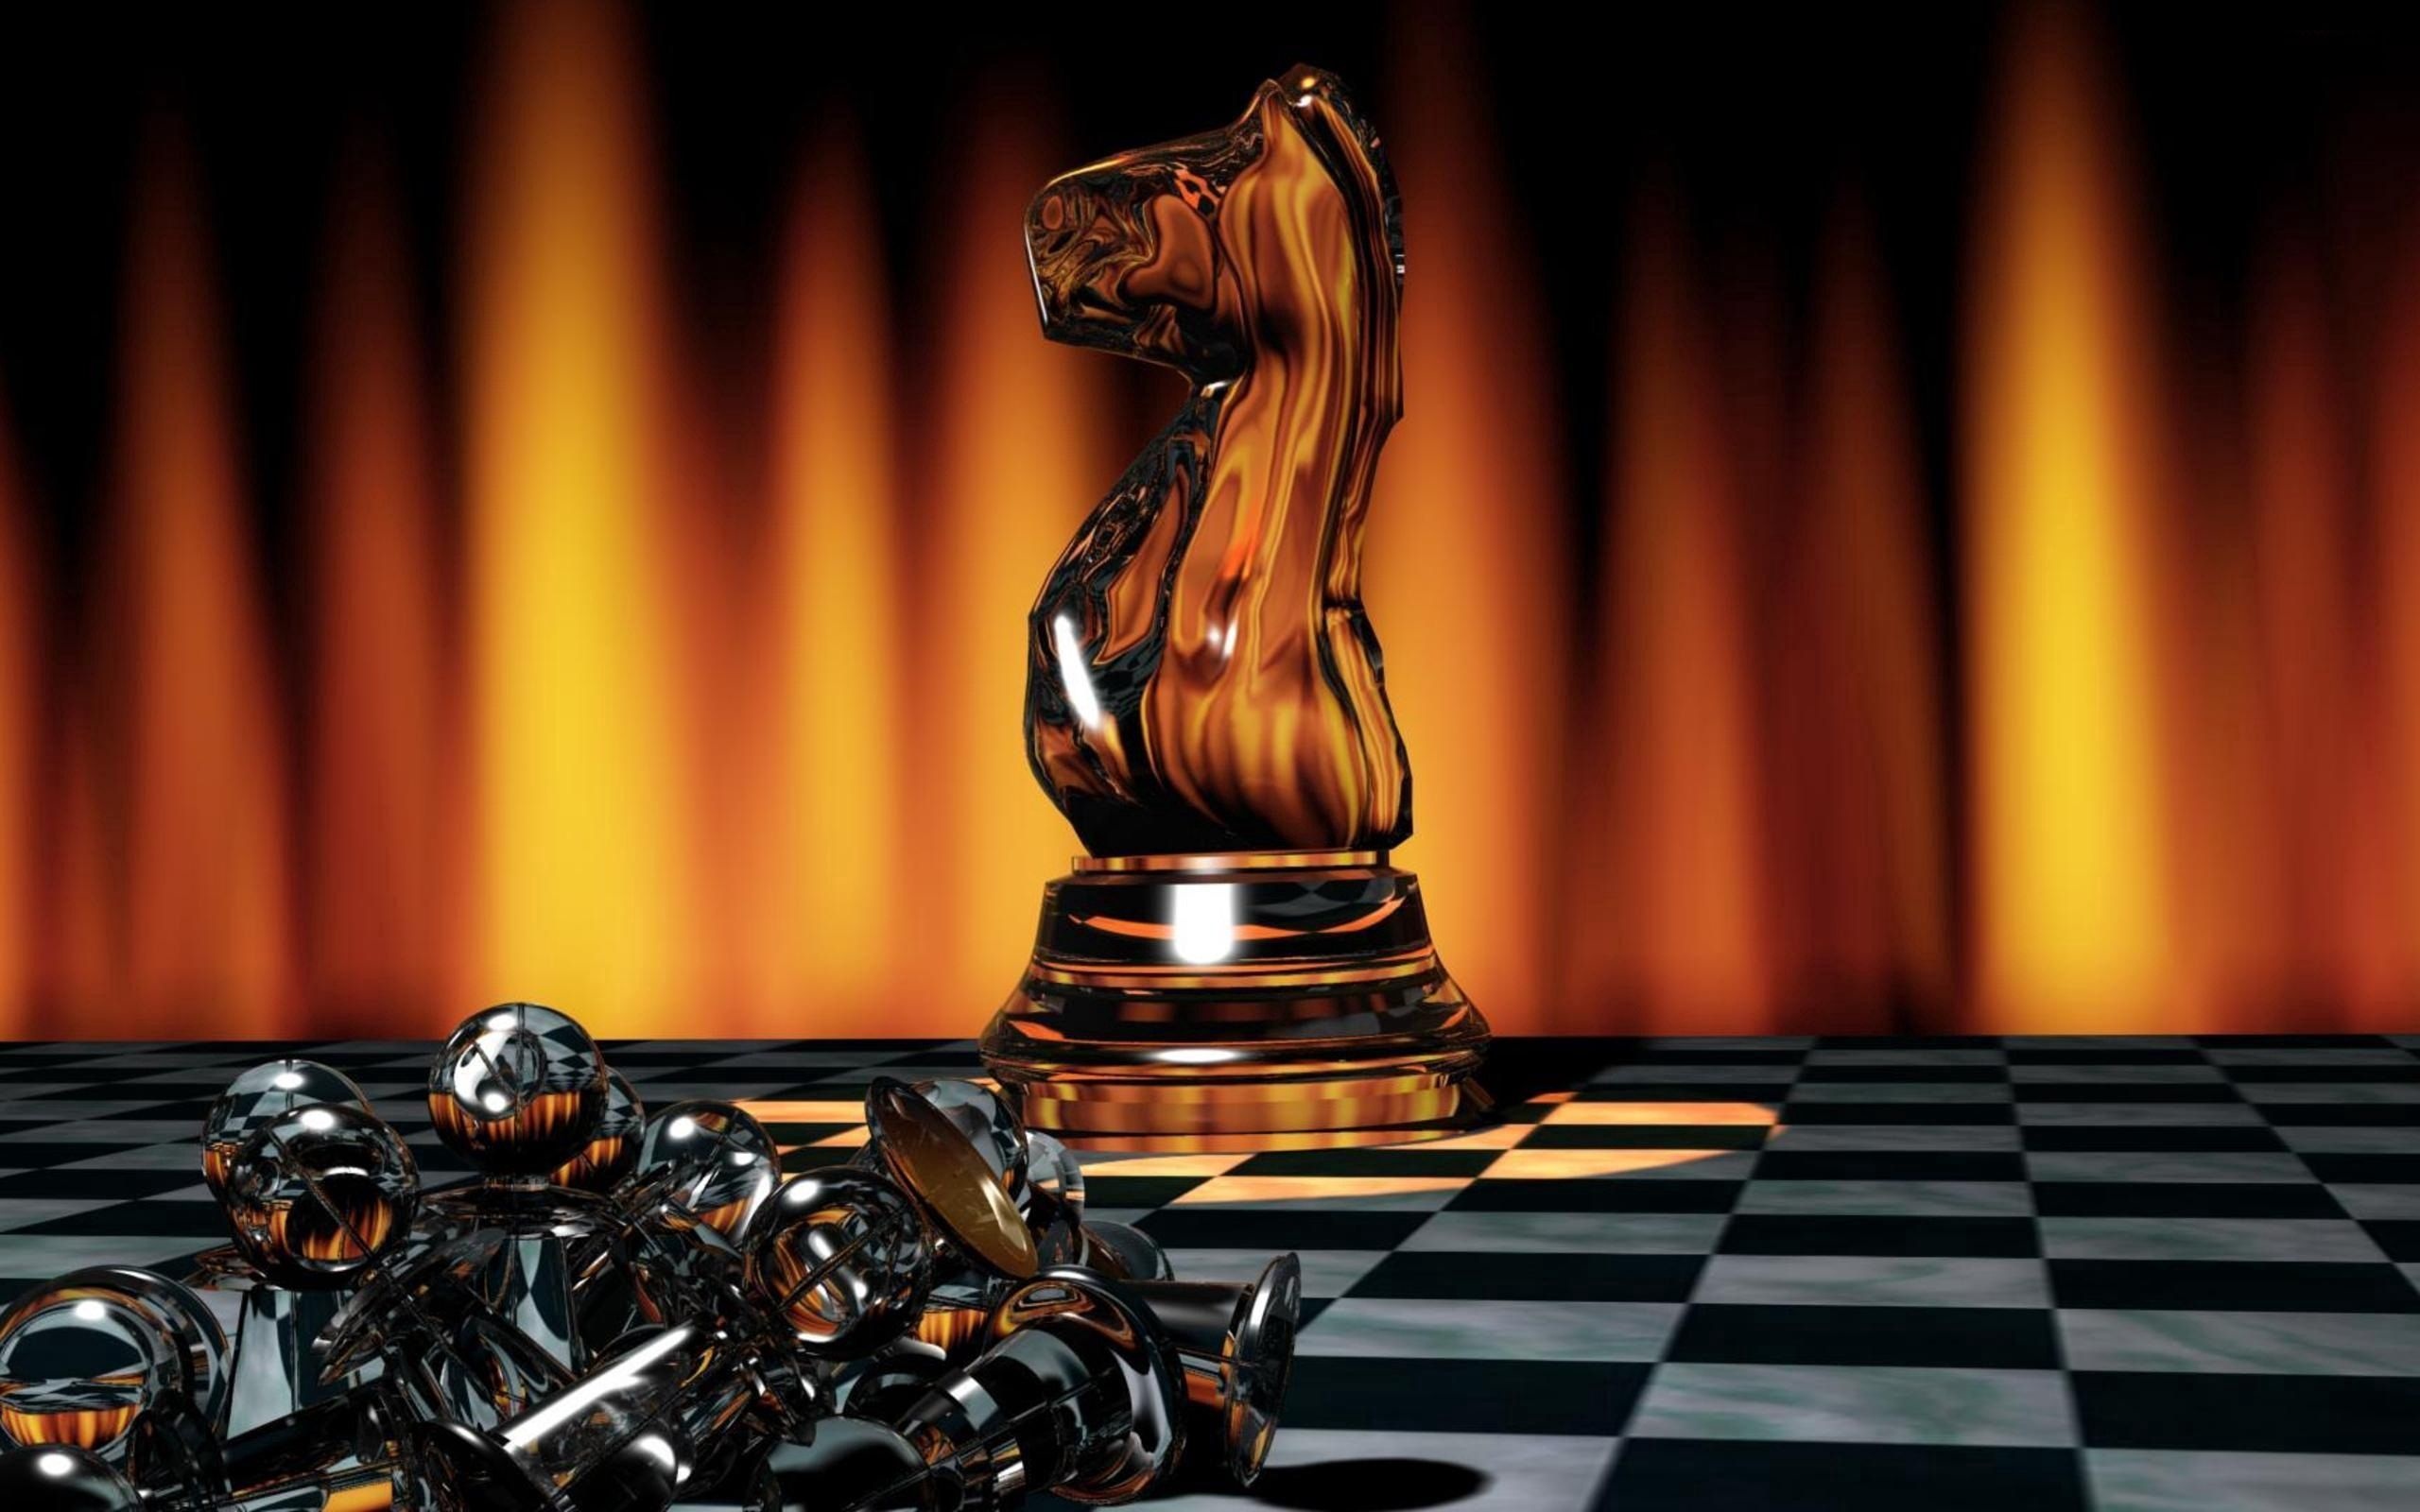 Mobile wallpaper, Chess objects, Free download, Picture, 2560x1600 HD Desktop